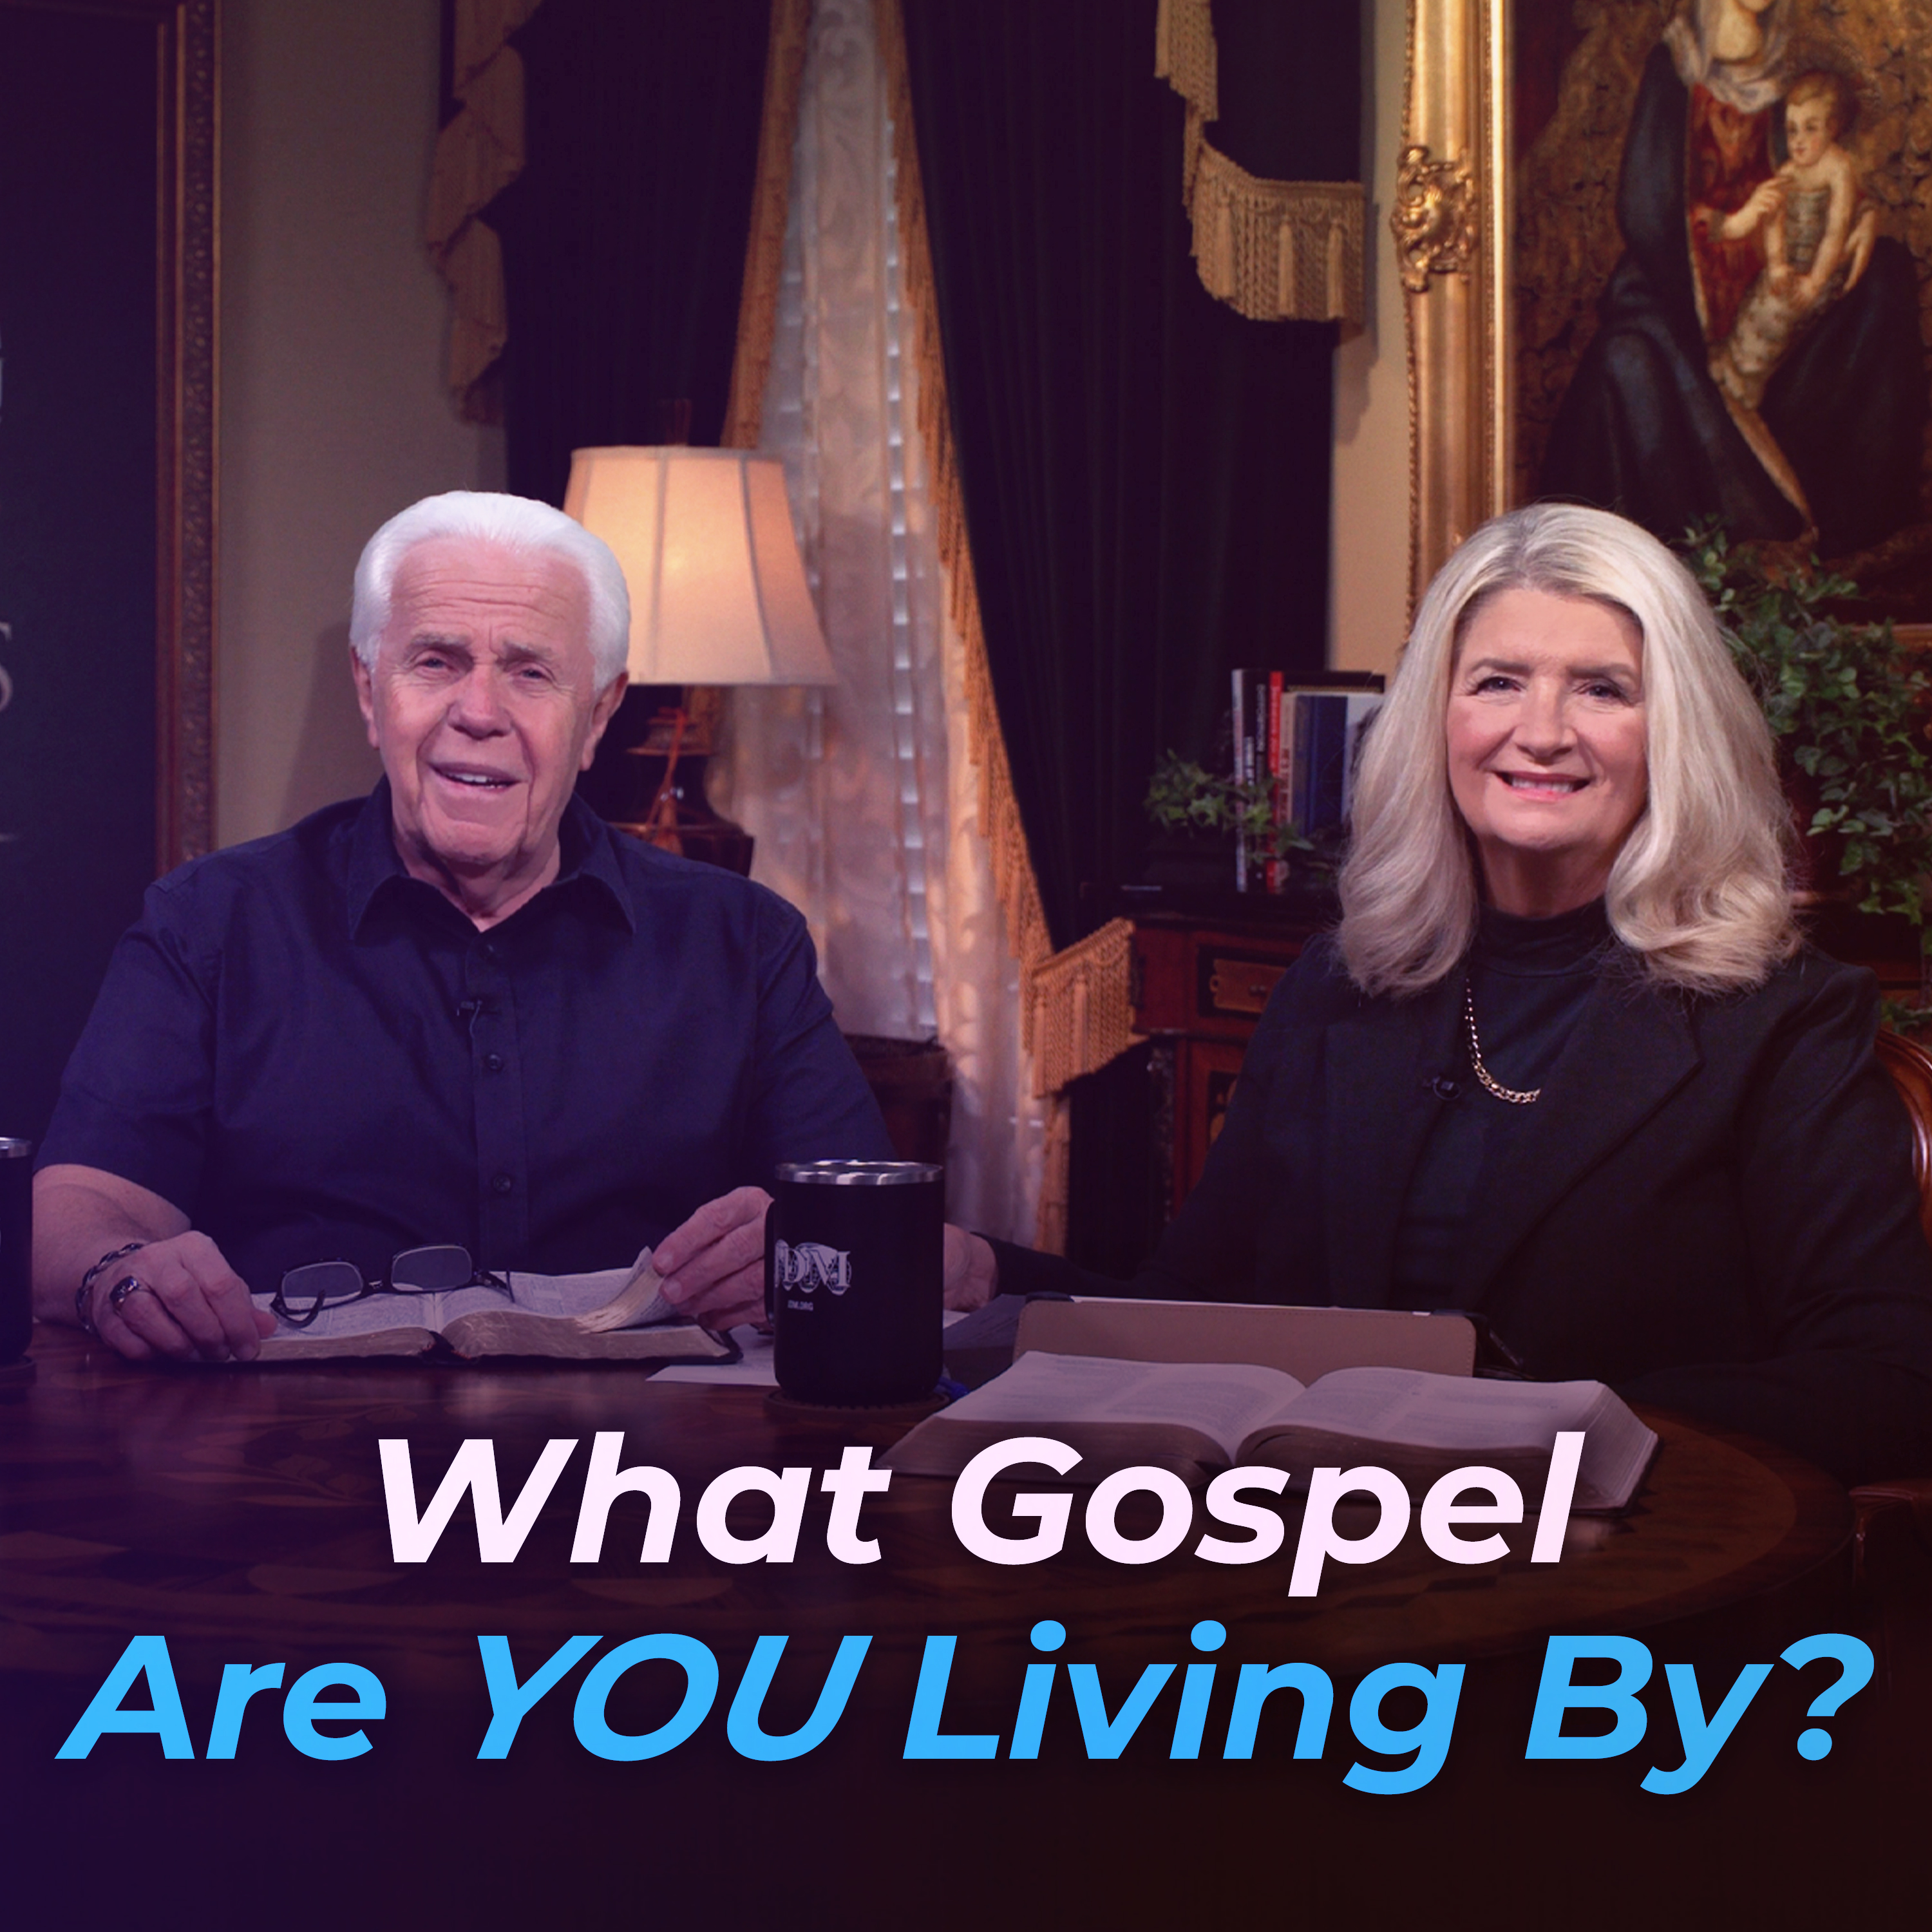 What Gospel Are You Living By?